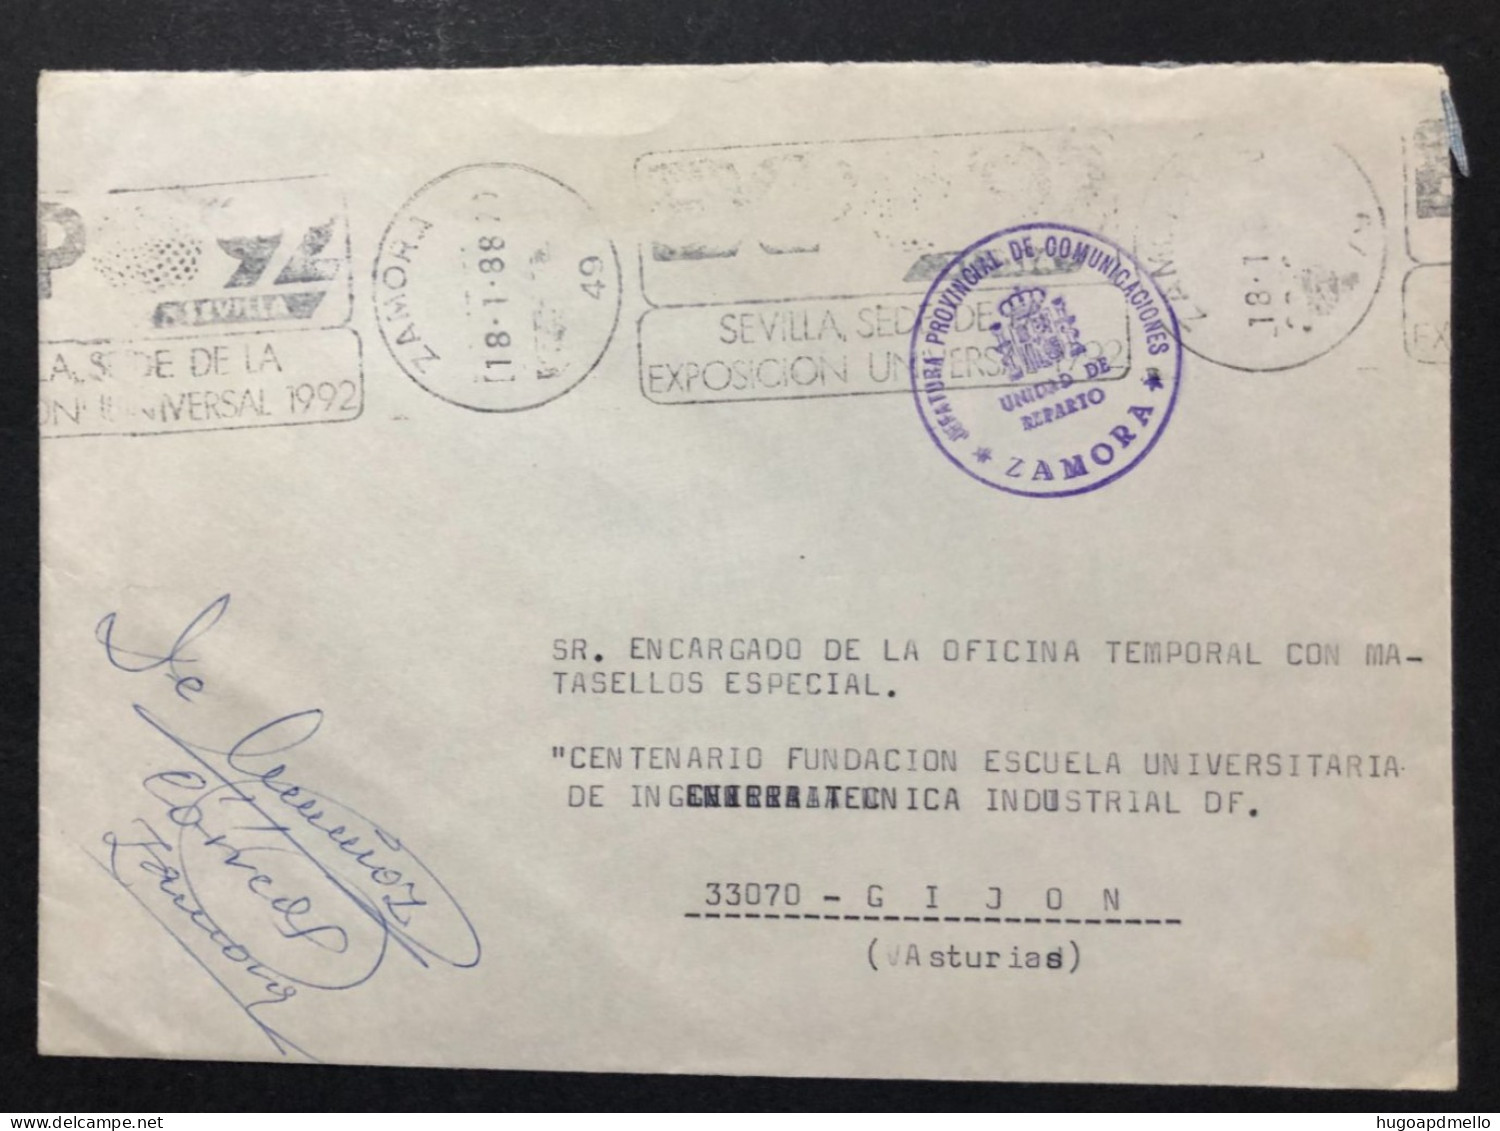 SPAIN, Cover With Special Cancellation « EXPO '92 », « ZAMORA Postmark », 1988 - 1992 – Séville (Espagne)